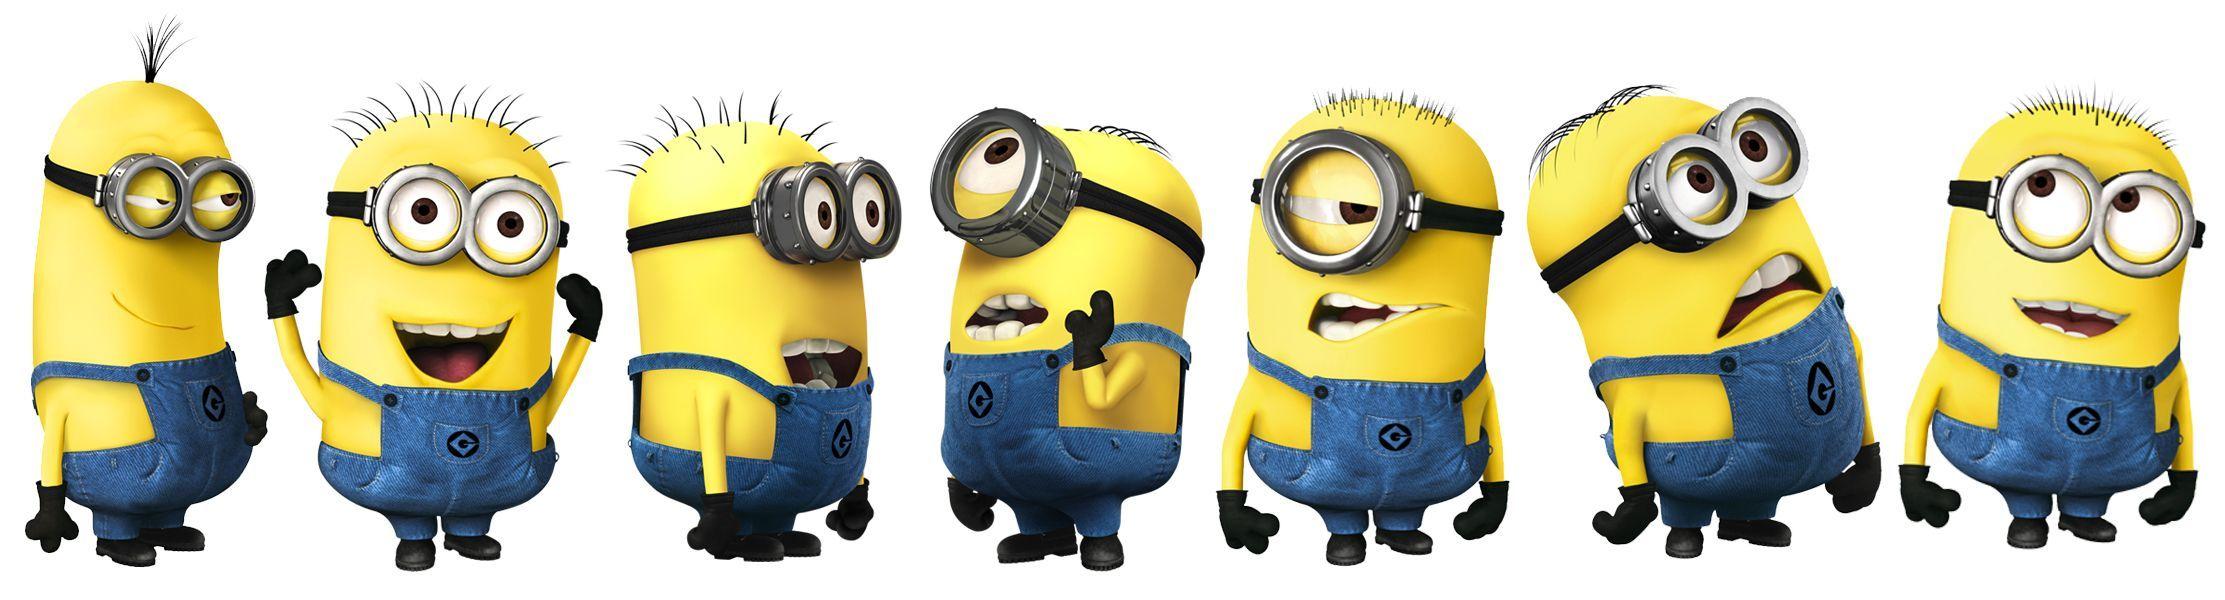 Wallpaper For – Minion Wallpapers